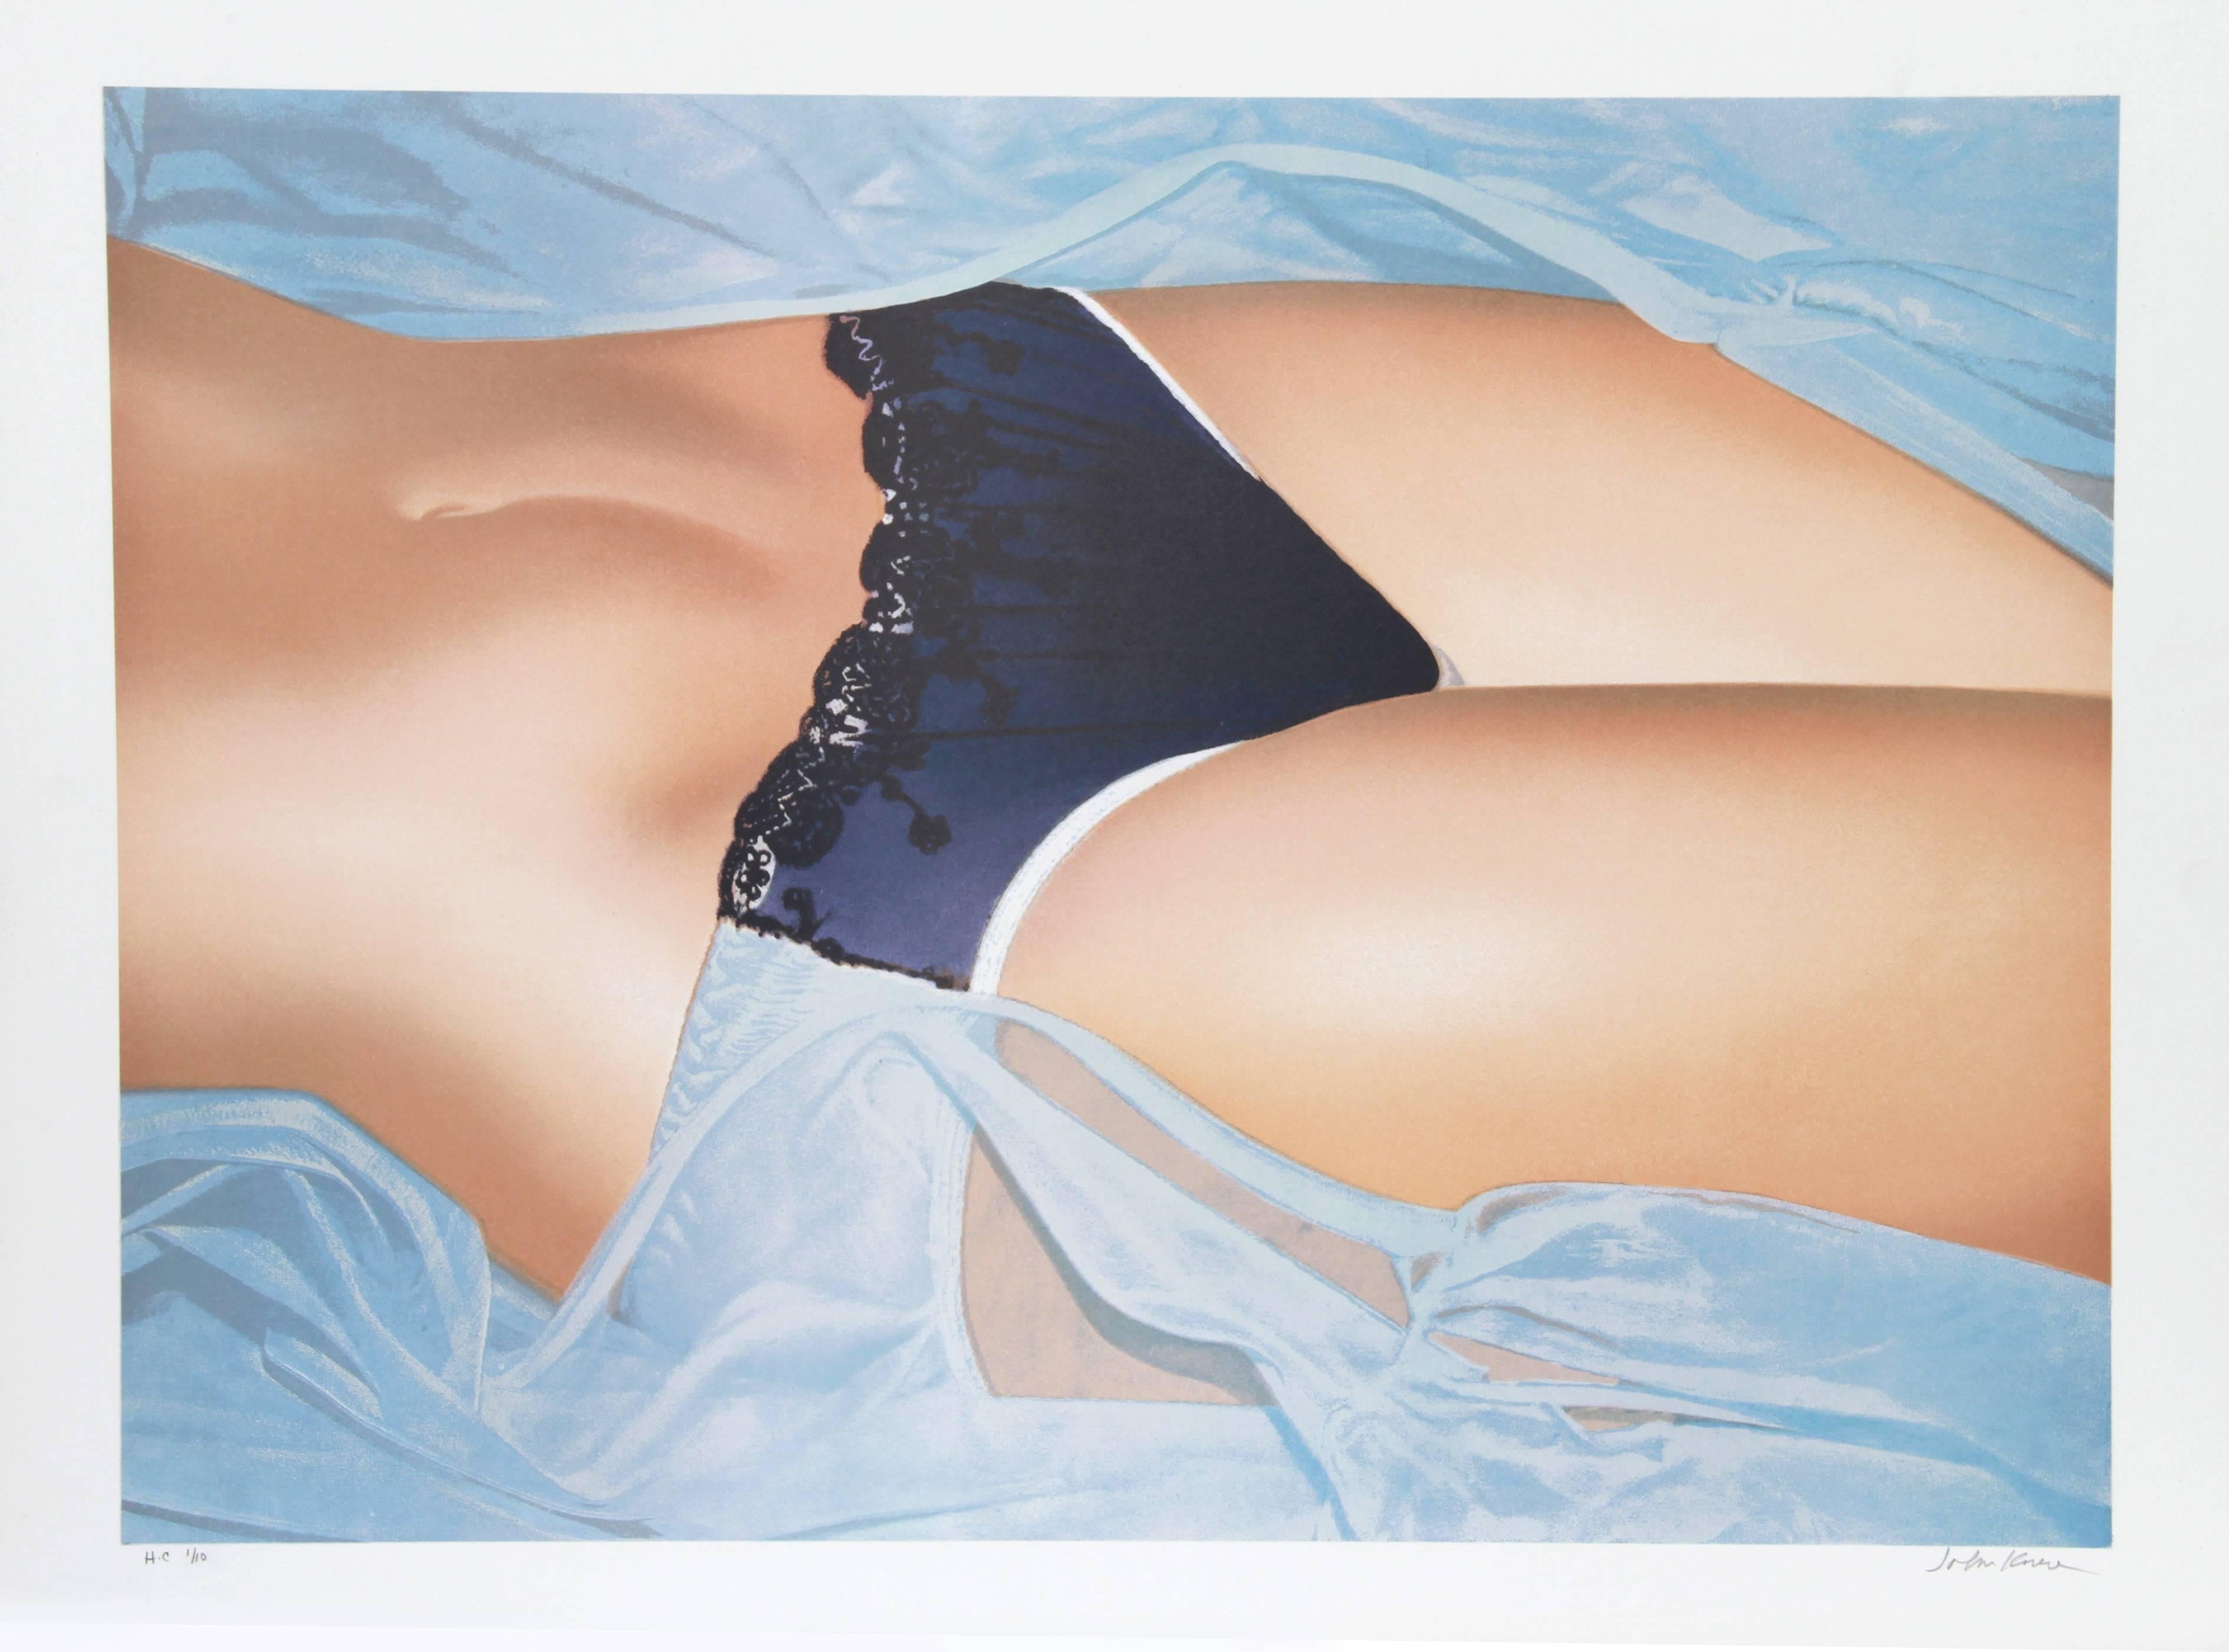 Artist: John Kacere, American (1920 - 1999)
Title: Blue Panties
Year: Circa 1980
Medium: Lithograph, signed and numbered in pencil
Edition: 300, HC 10
Image Size: 19 x 26 inches
Size: 22 in. x 29.5 in. (55.88 cm x 74.93 cm)